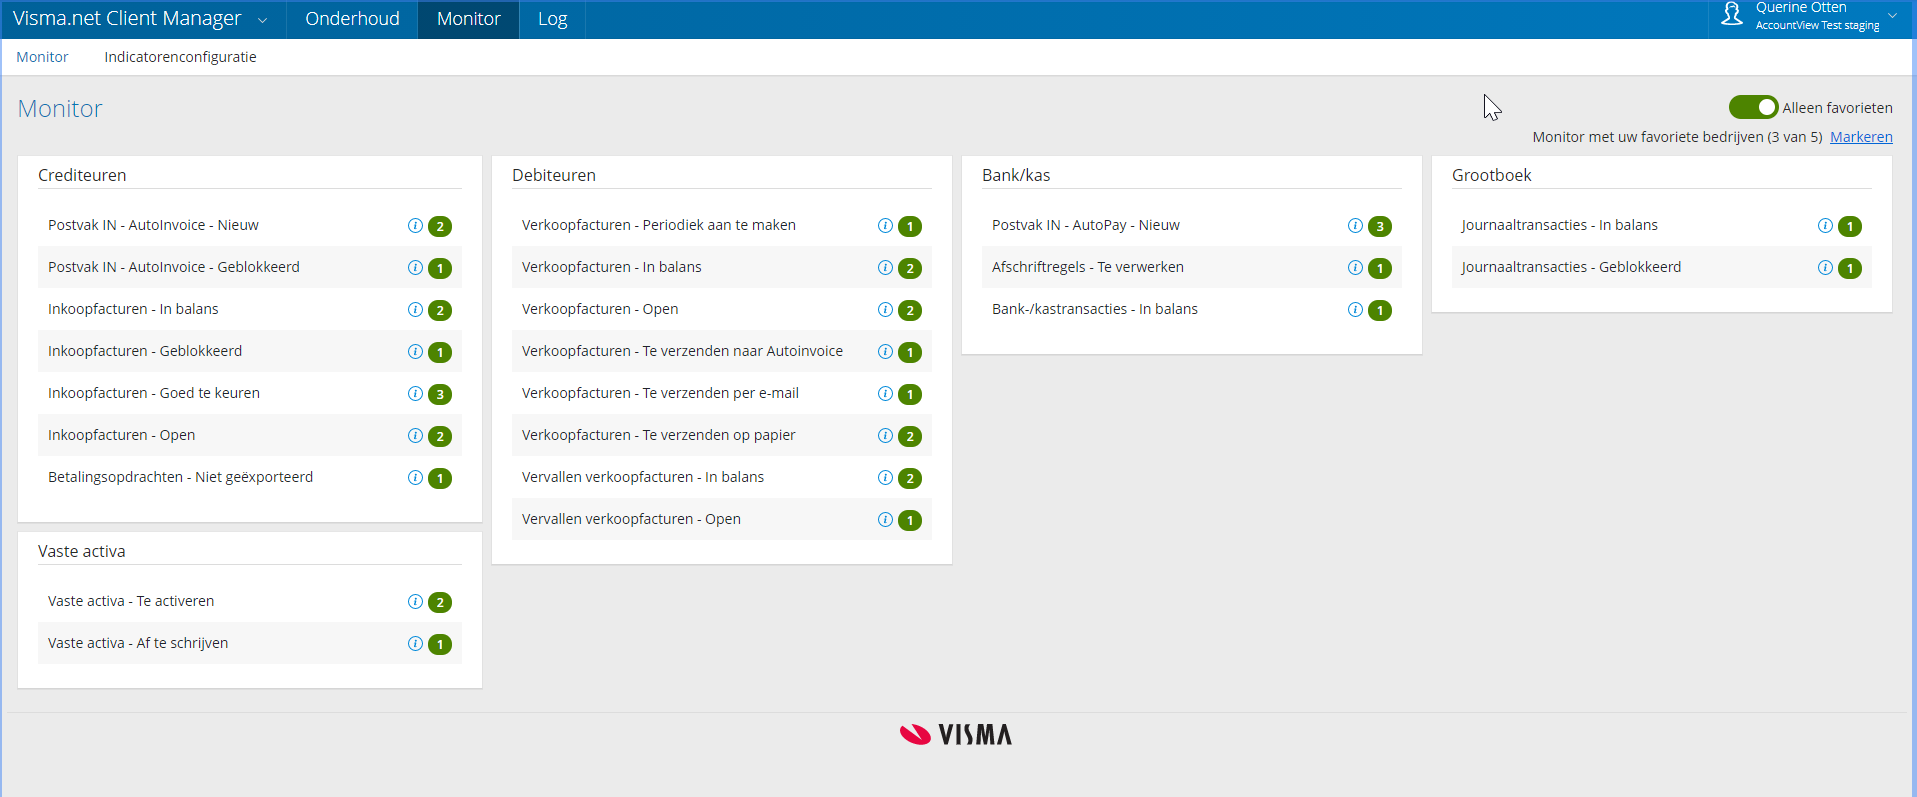 visma-net-client-manager-monitor01.png